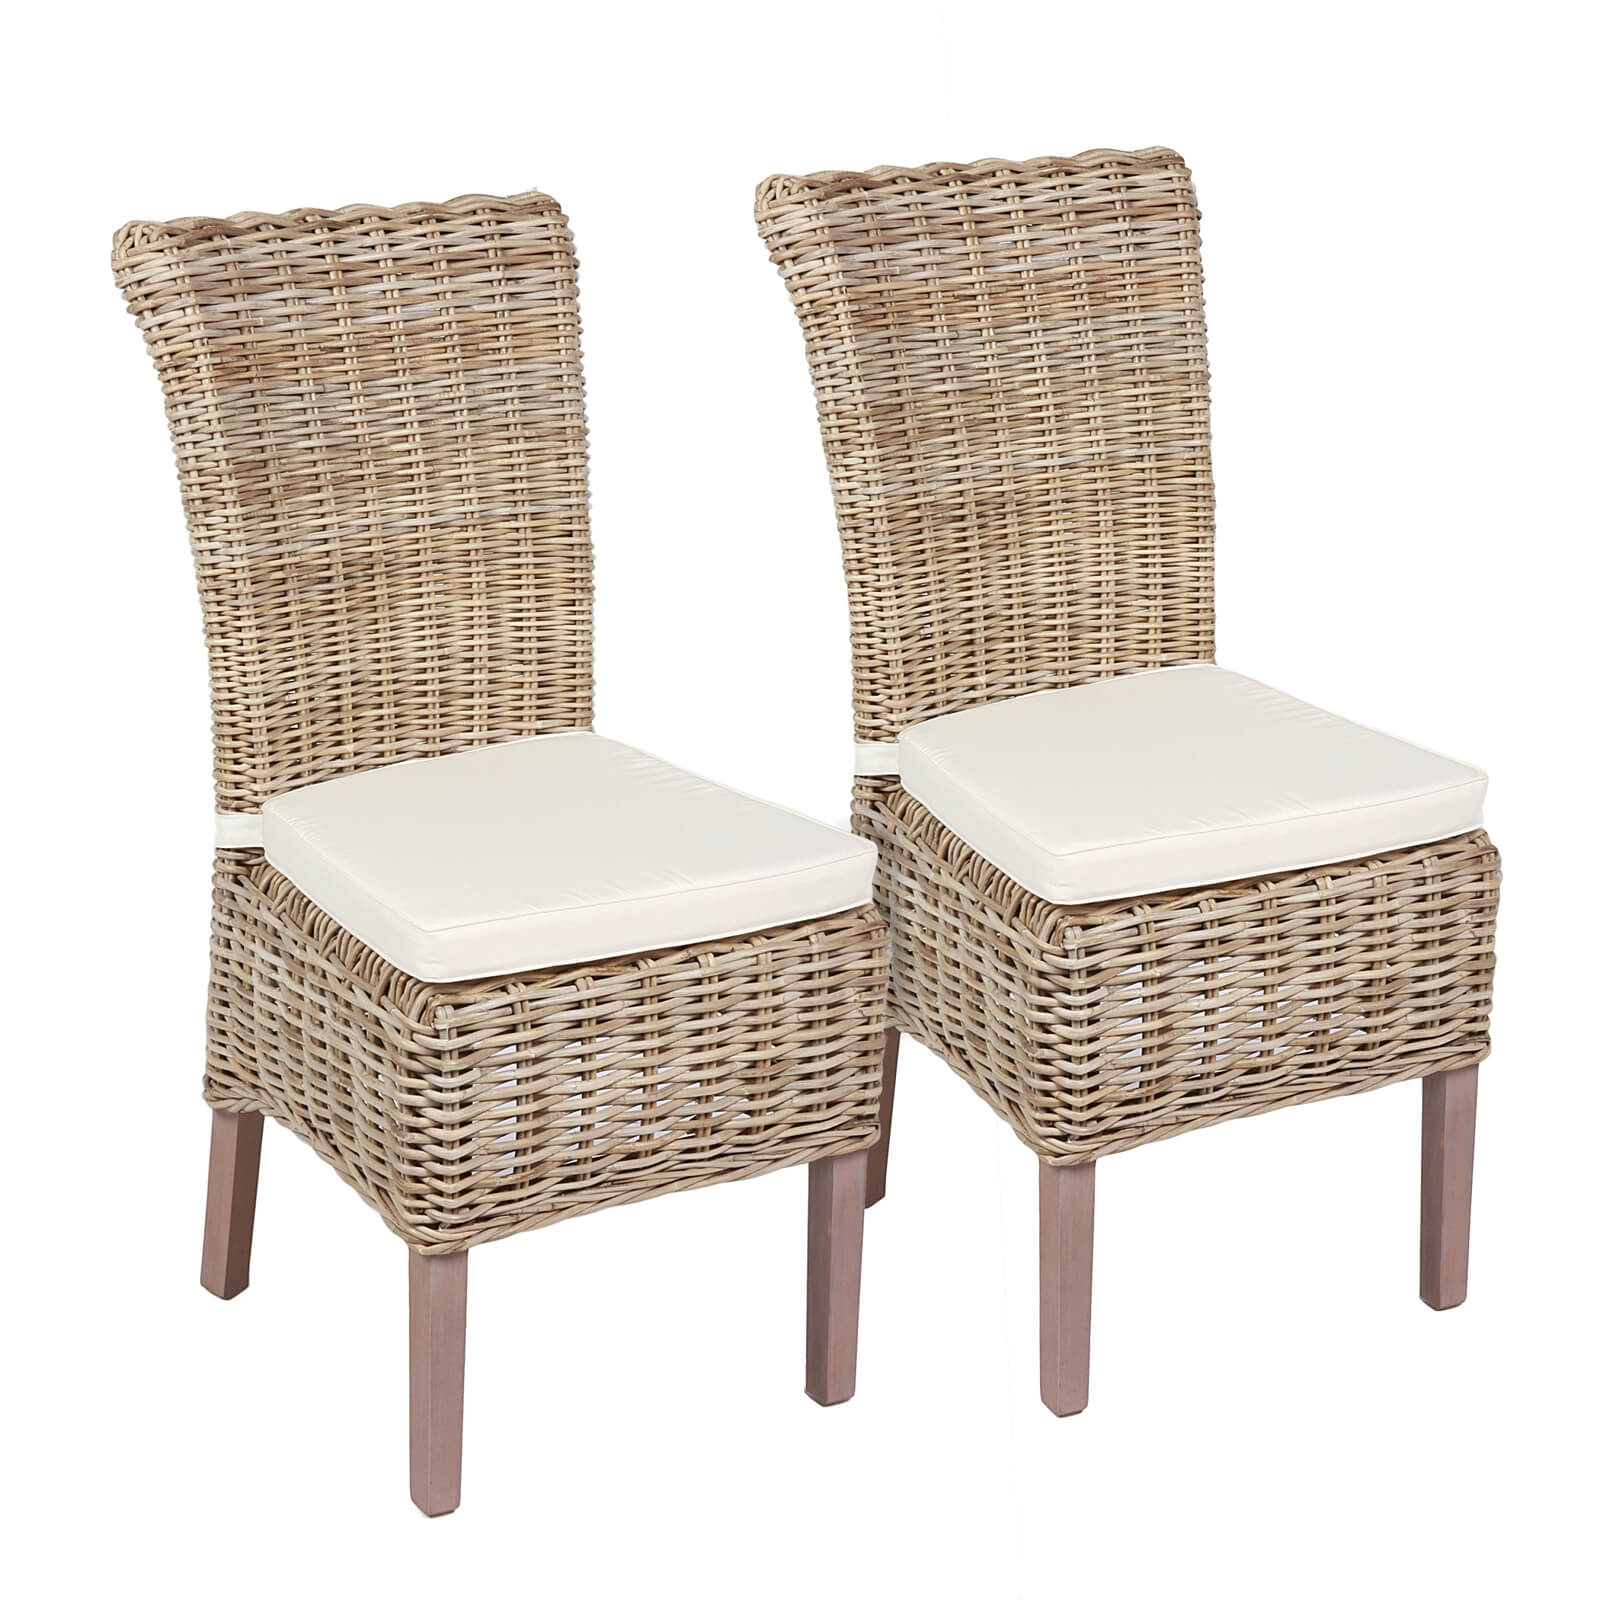 Holywell Dining Chairs with Cushion - Set of 2